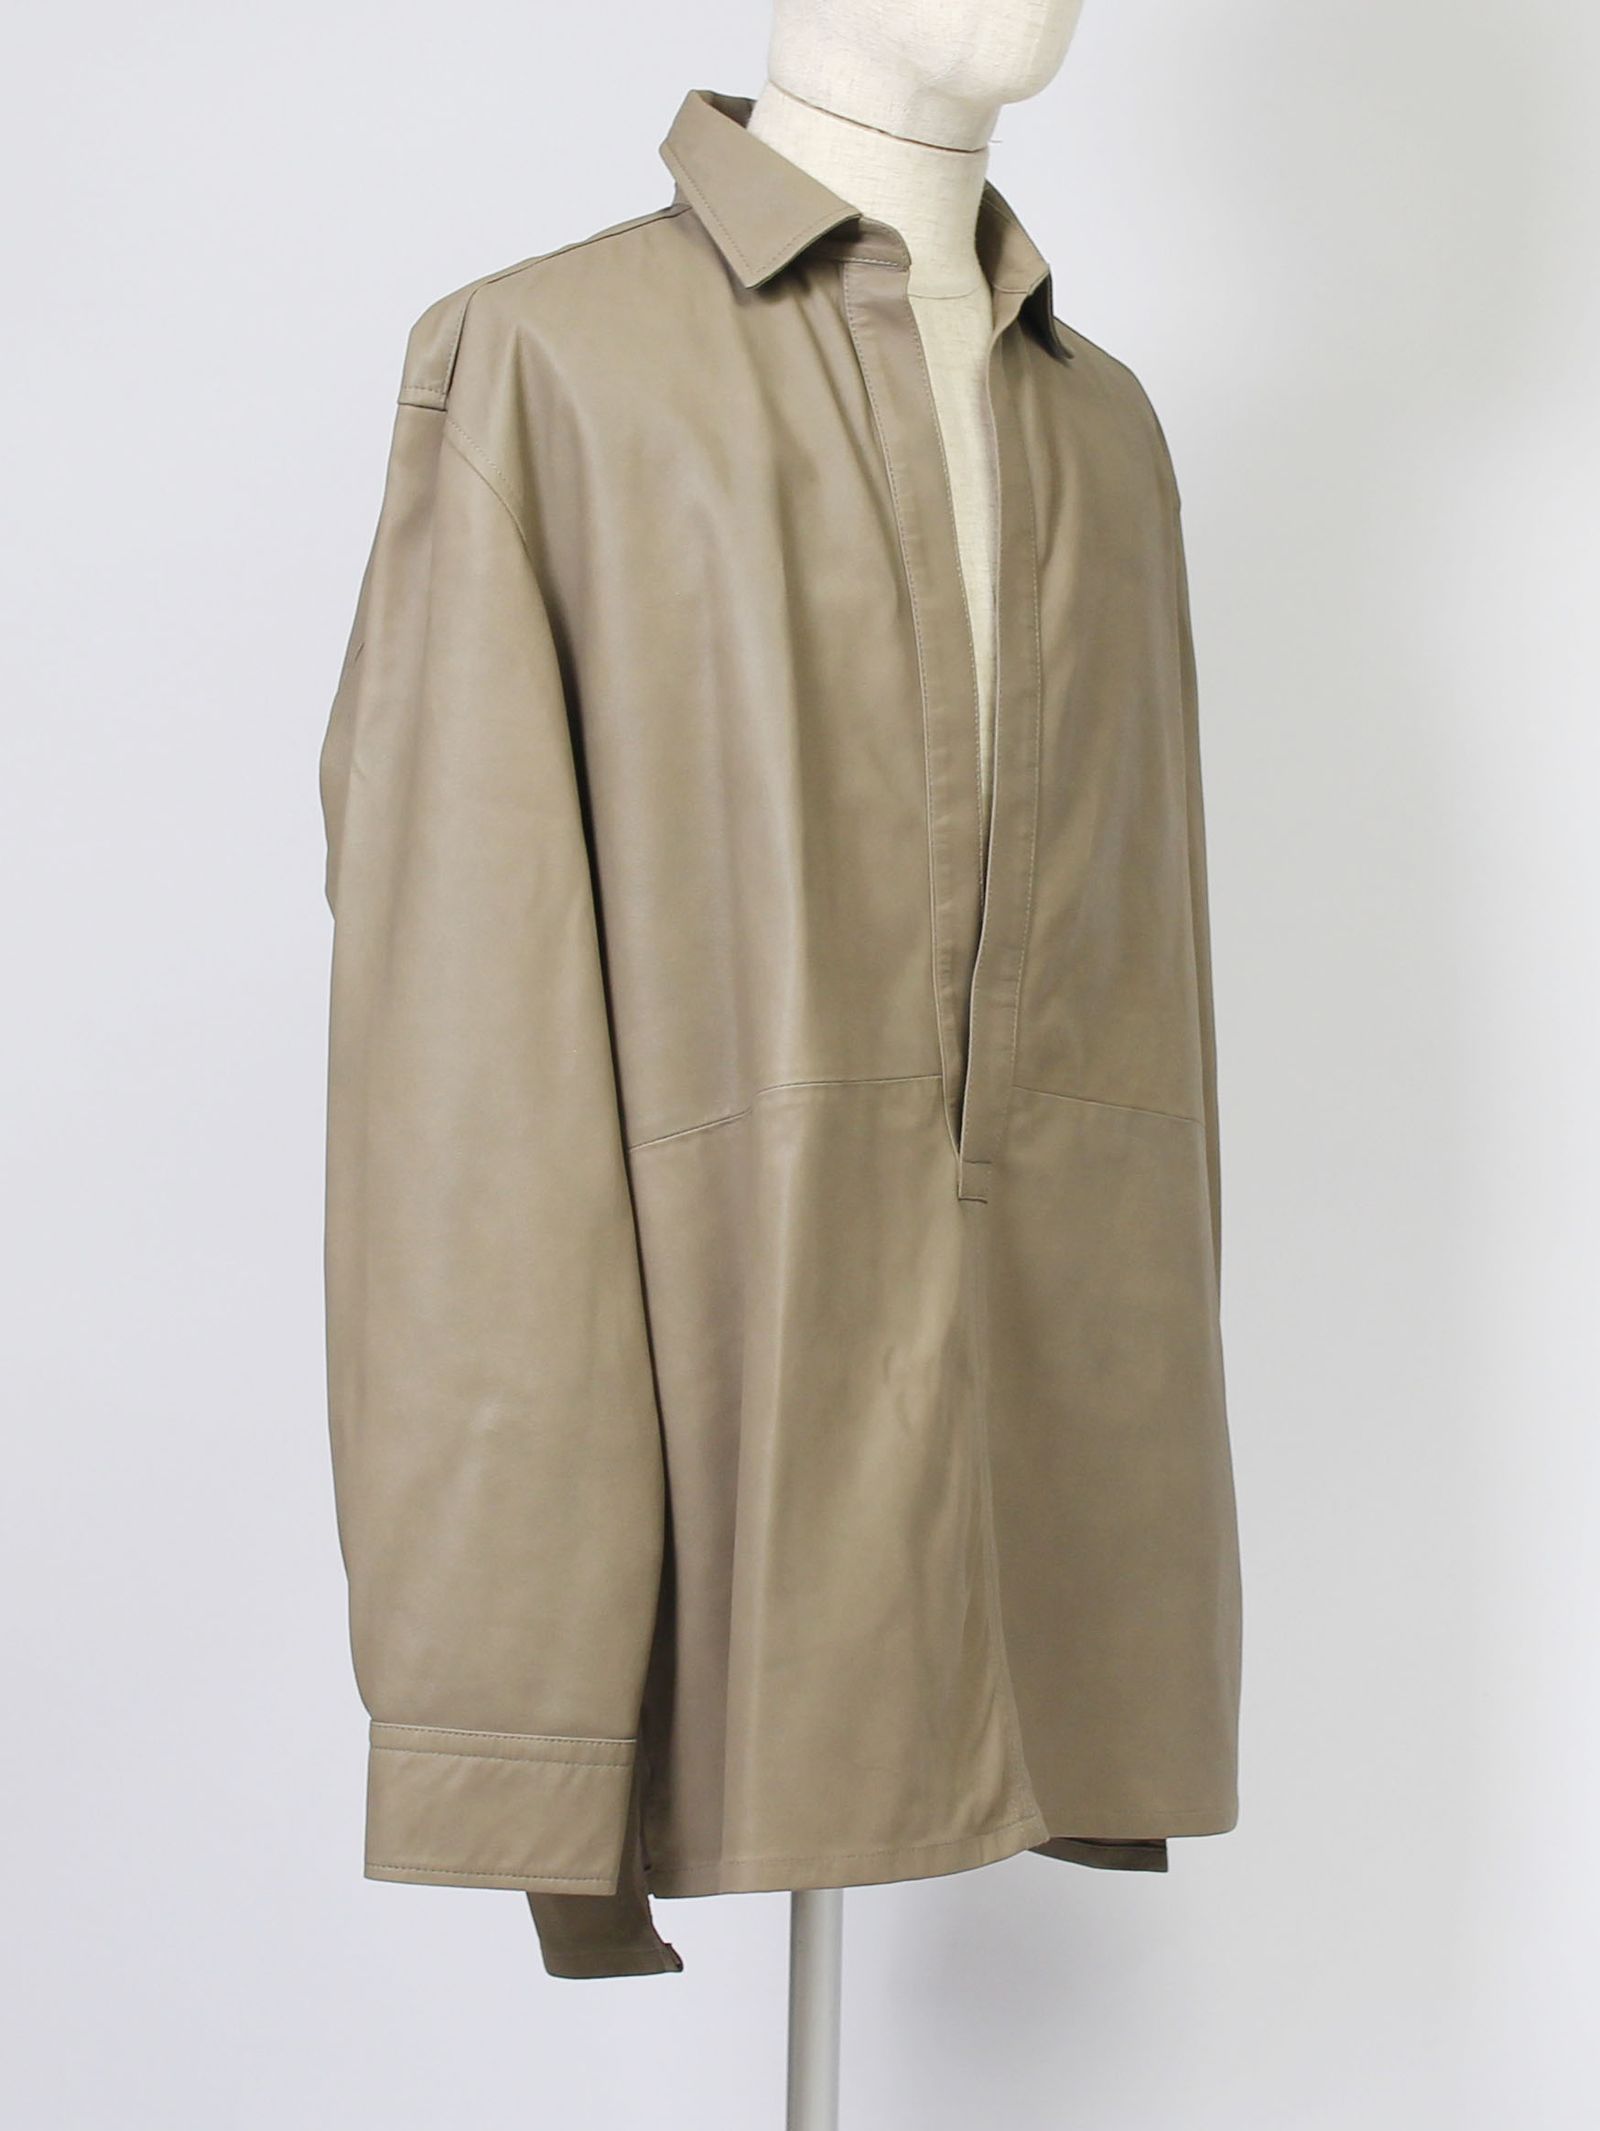 SEVEN BY SEVEN - LETHAER PULLOVER SHIRTS - Goat leather